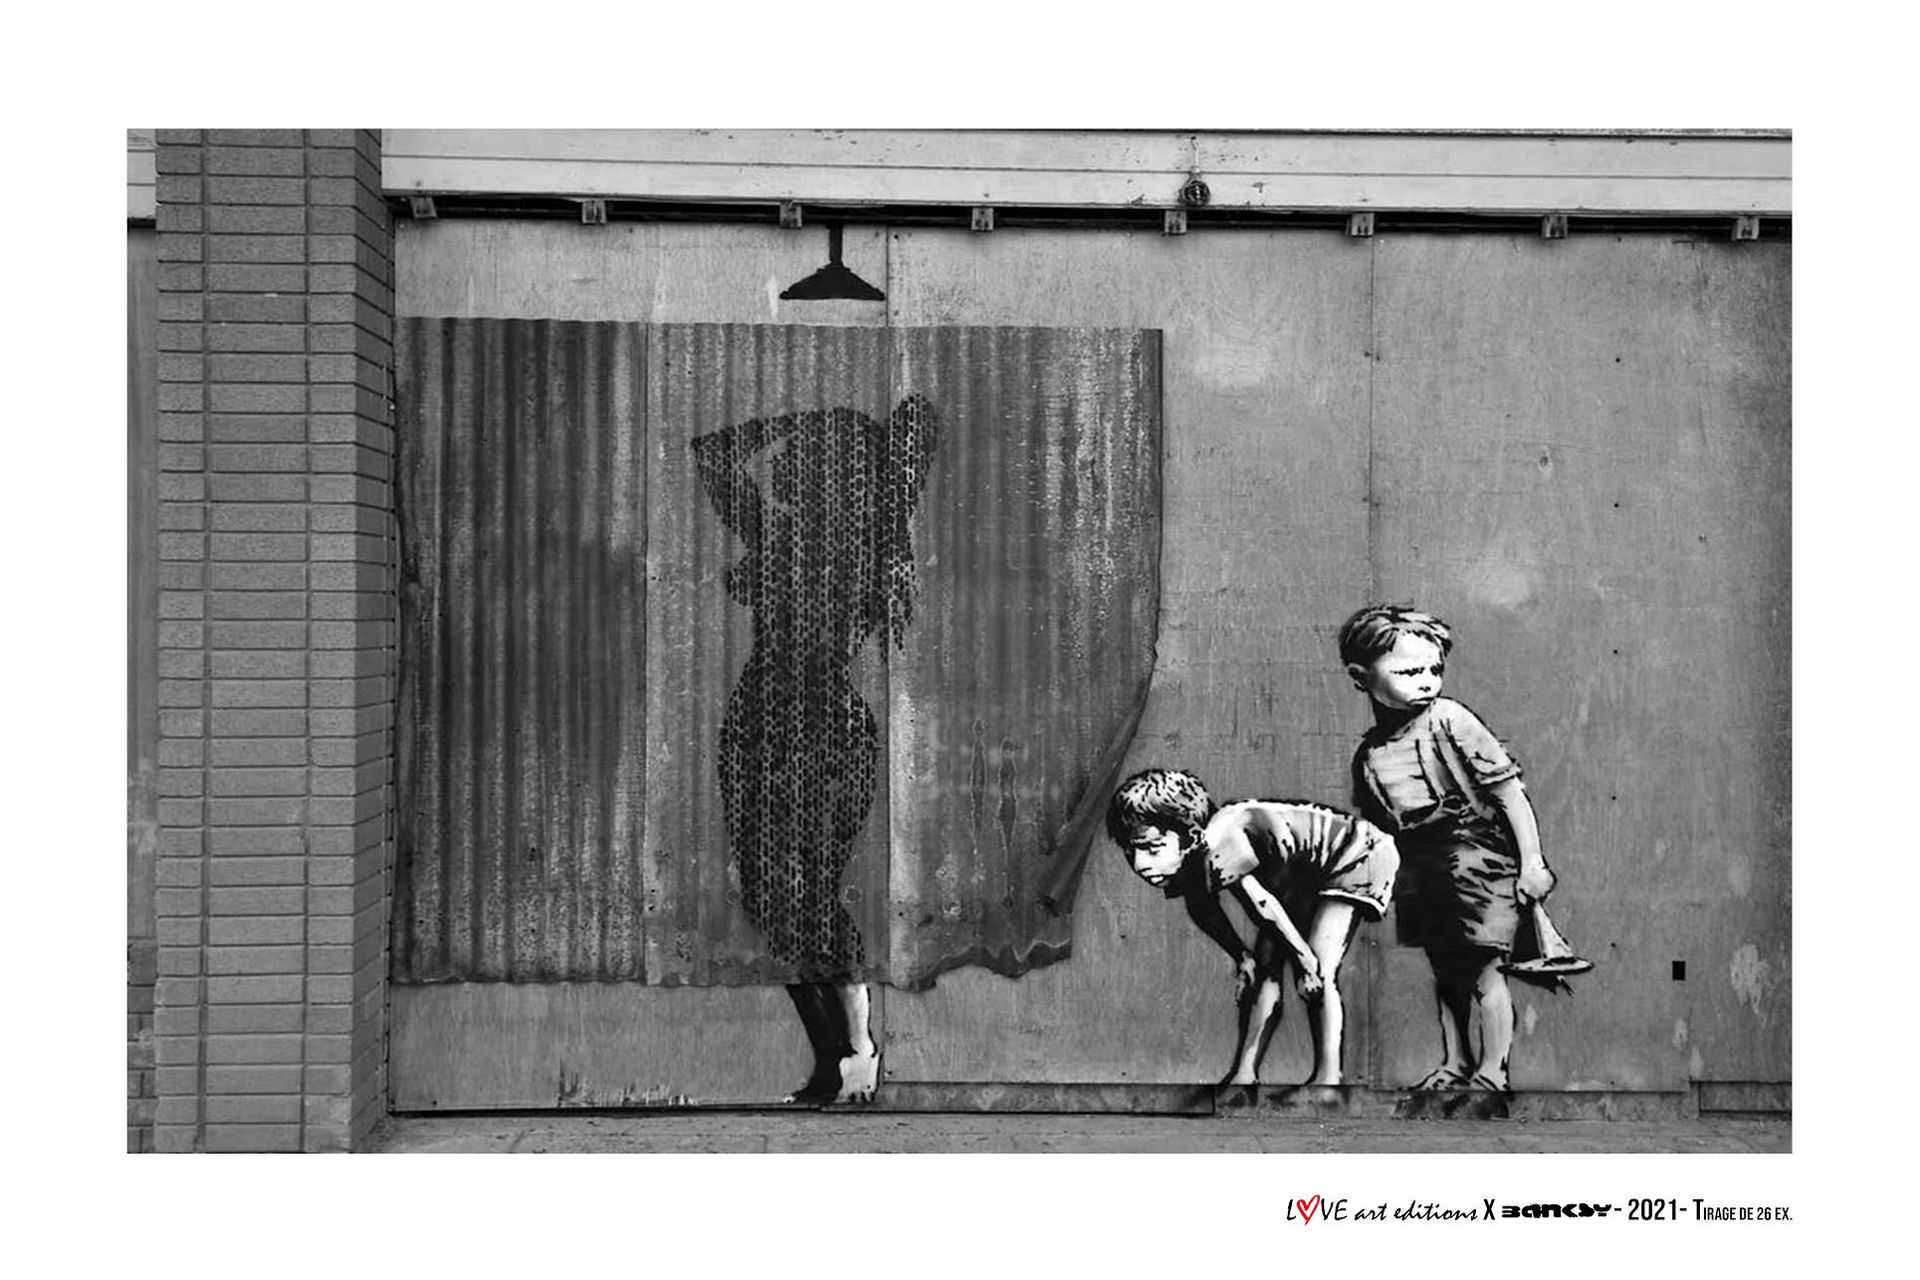 LOVE ART EDITIONS X BANKSY LOVE ART EDITIONS X BANKSY
Photograph from the "WALL"&hellip;